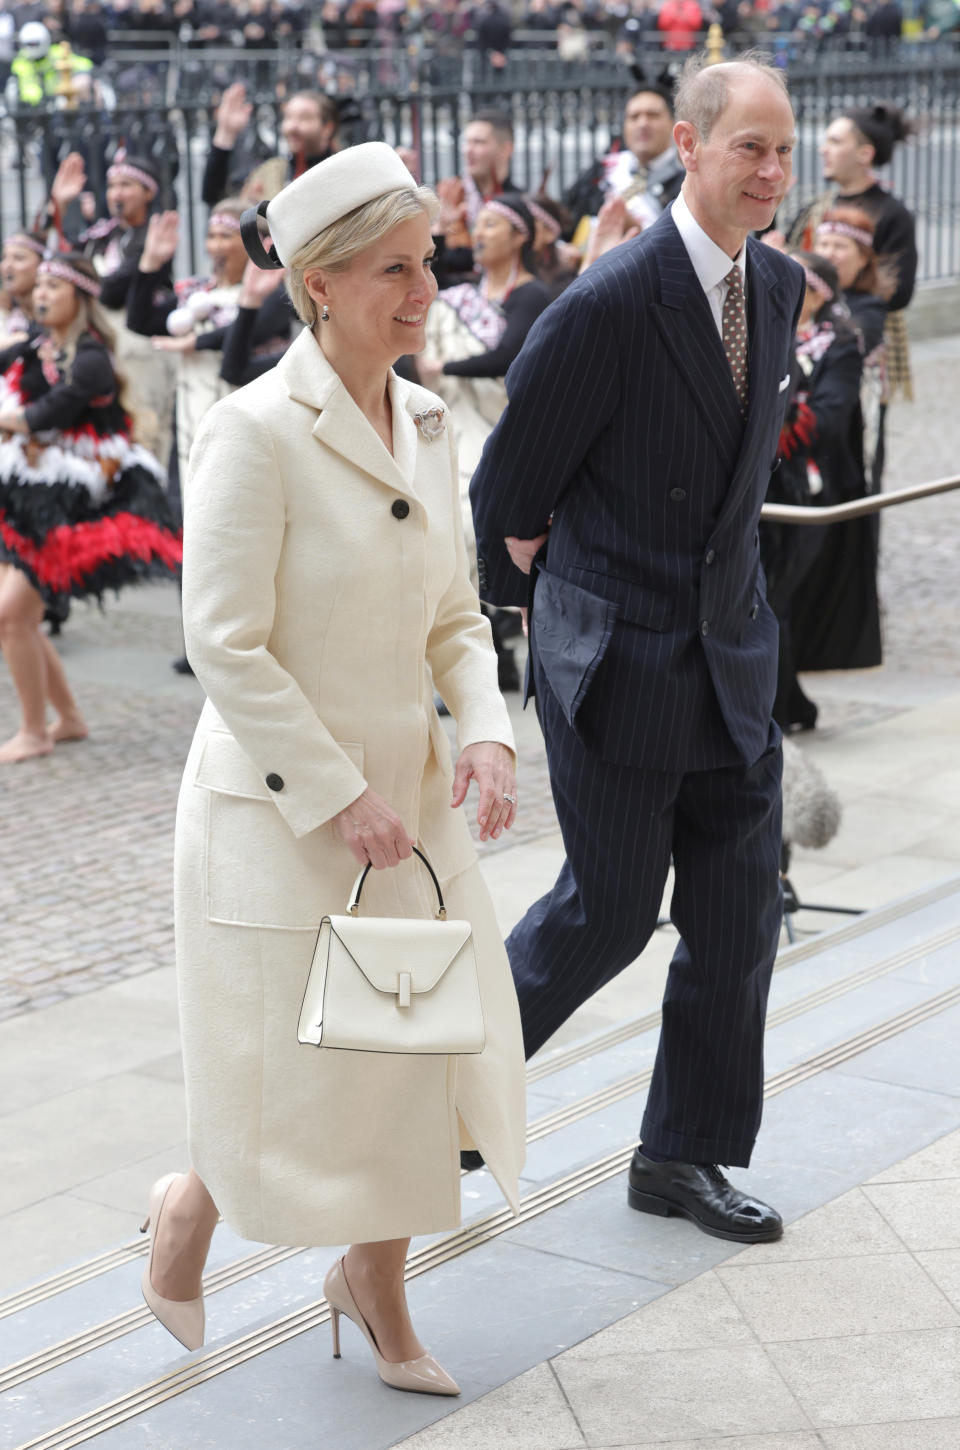 Sophie, Duchess of Edinburgh and Prince Edward, Duke of Edinburgh attend the 2023 Commonwealth Day Service at Westminster Abbey on March 13, 2023 in London, England. Getty Images)